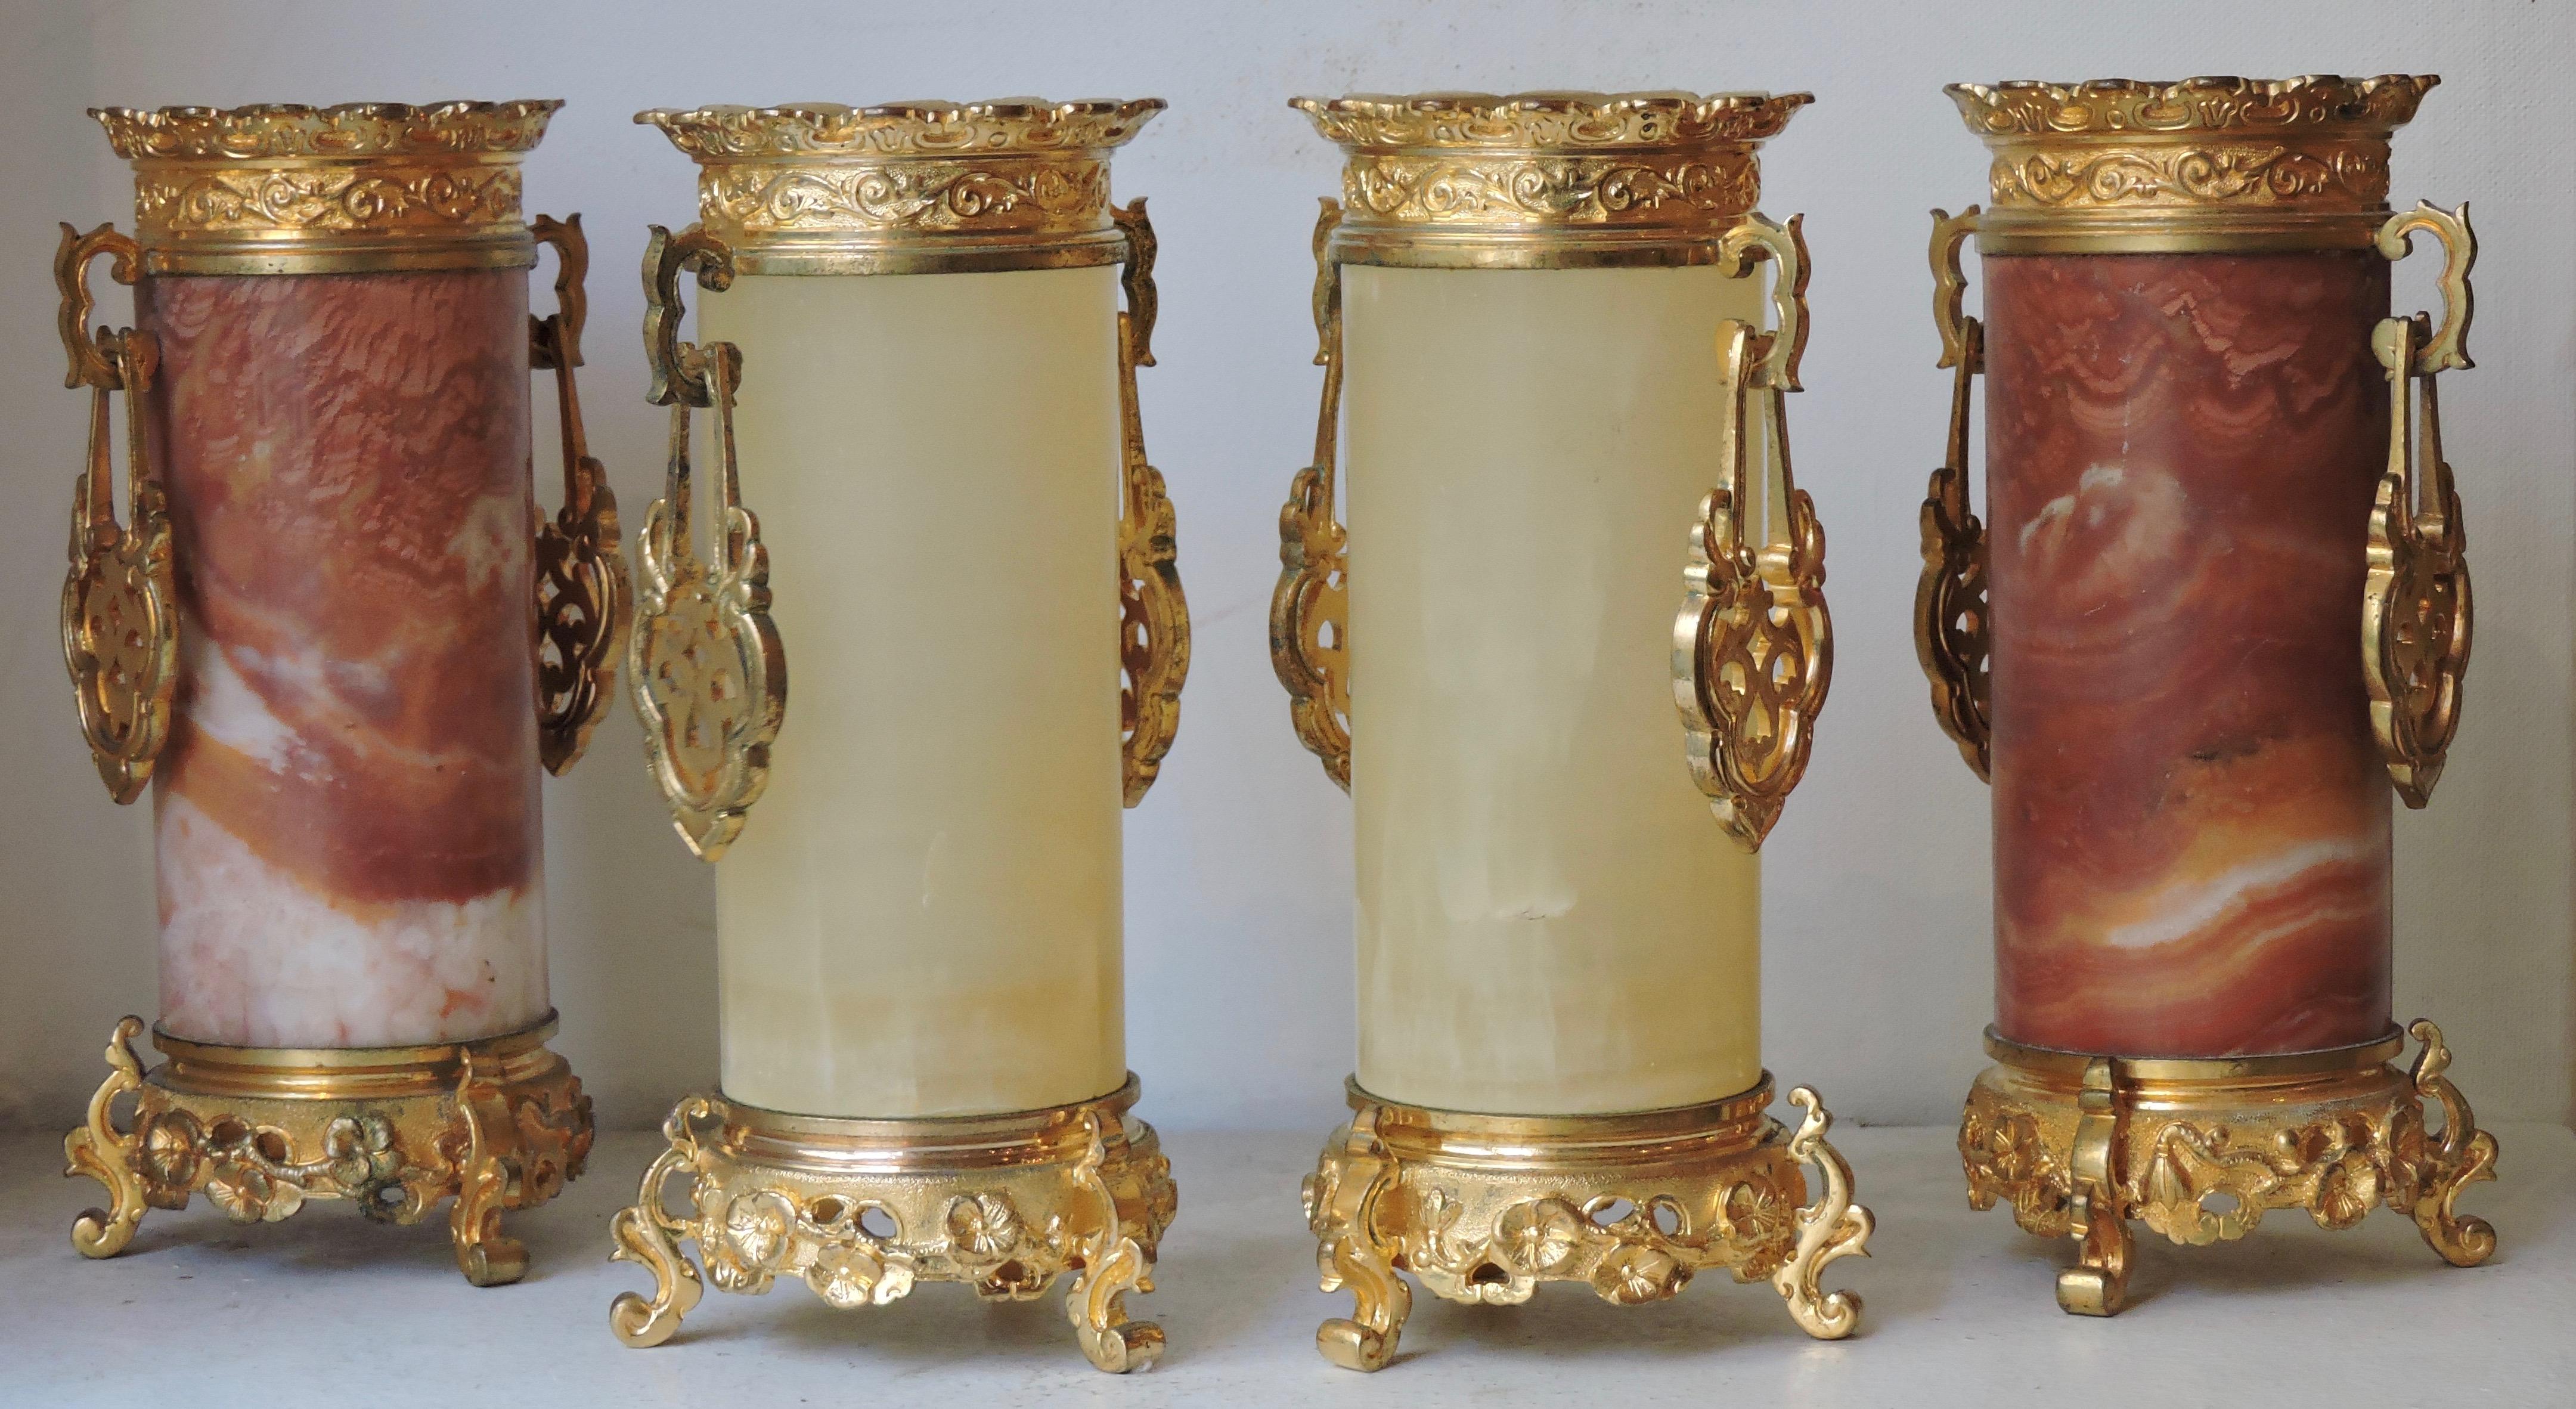 Set of 4 Japonisme Marble, Onyx and Ormolu Vases in the Style of Edouard Lièvre (Japonismus)